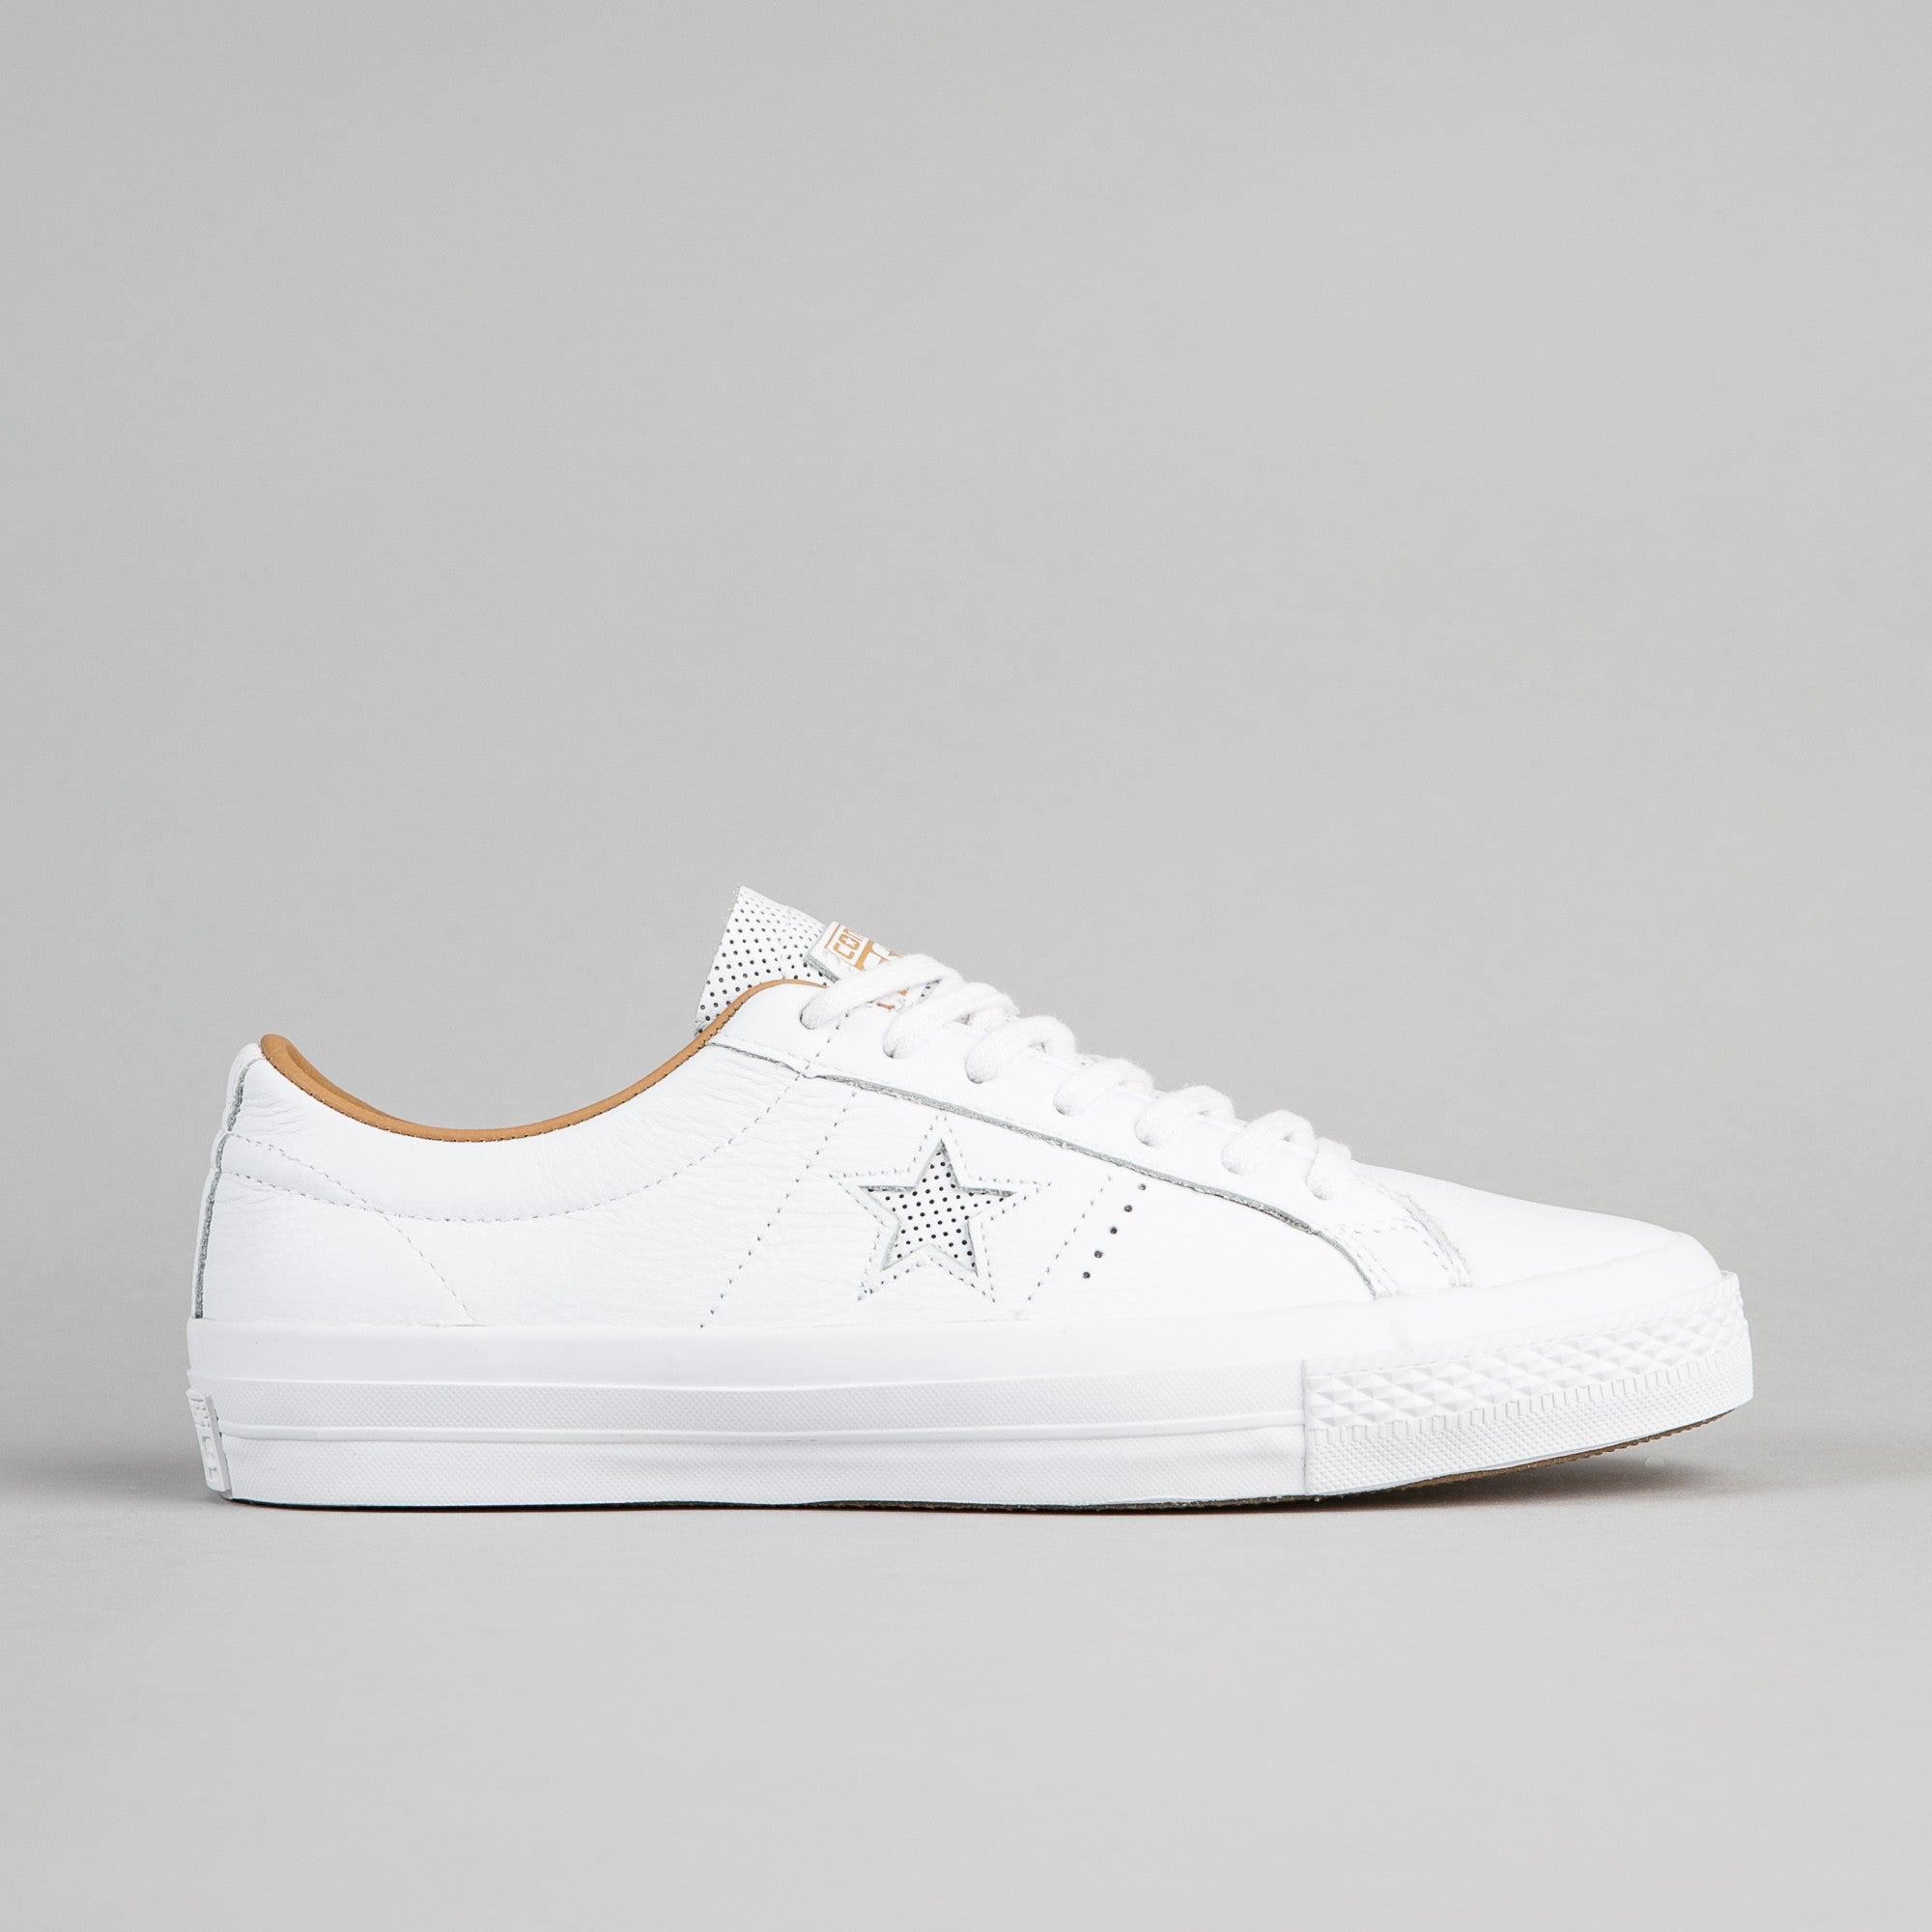 converse one star perforated leather 